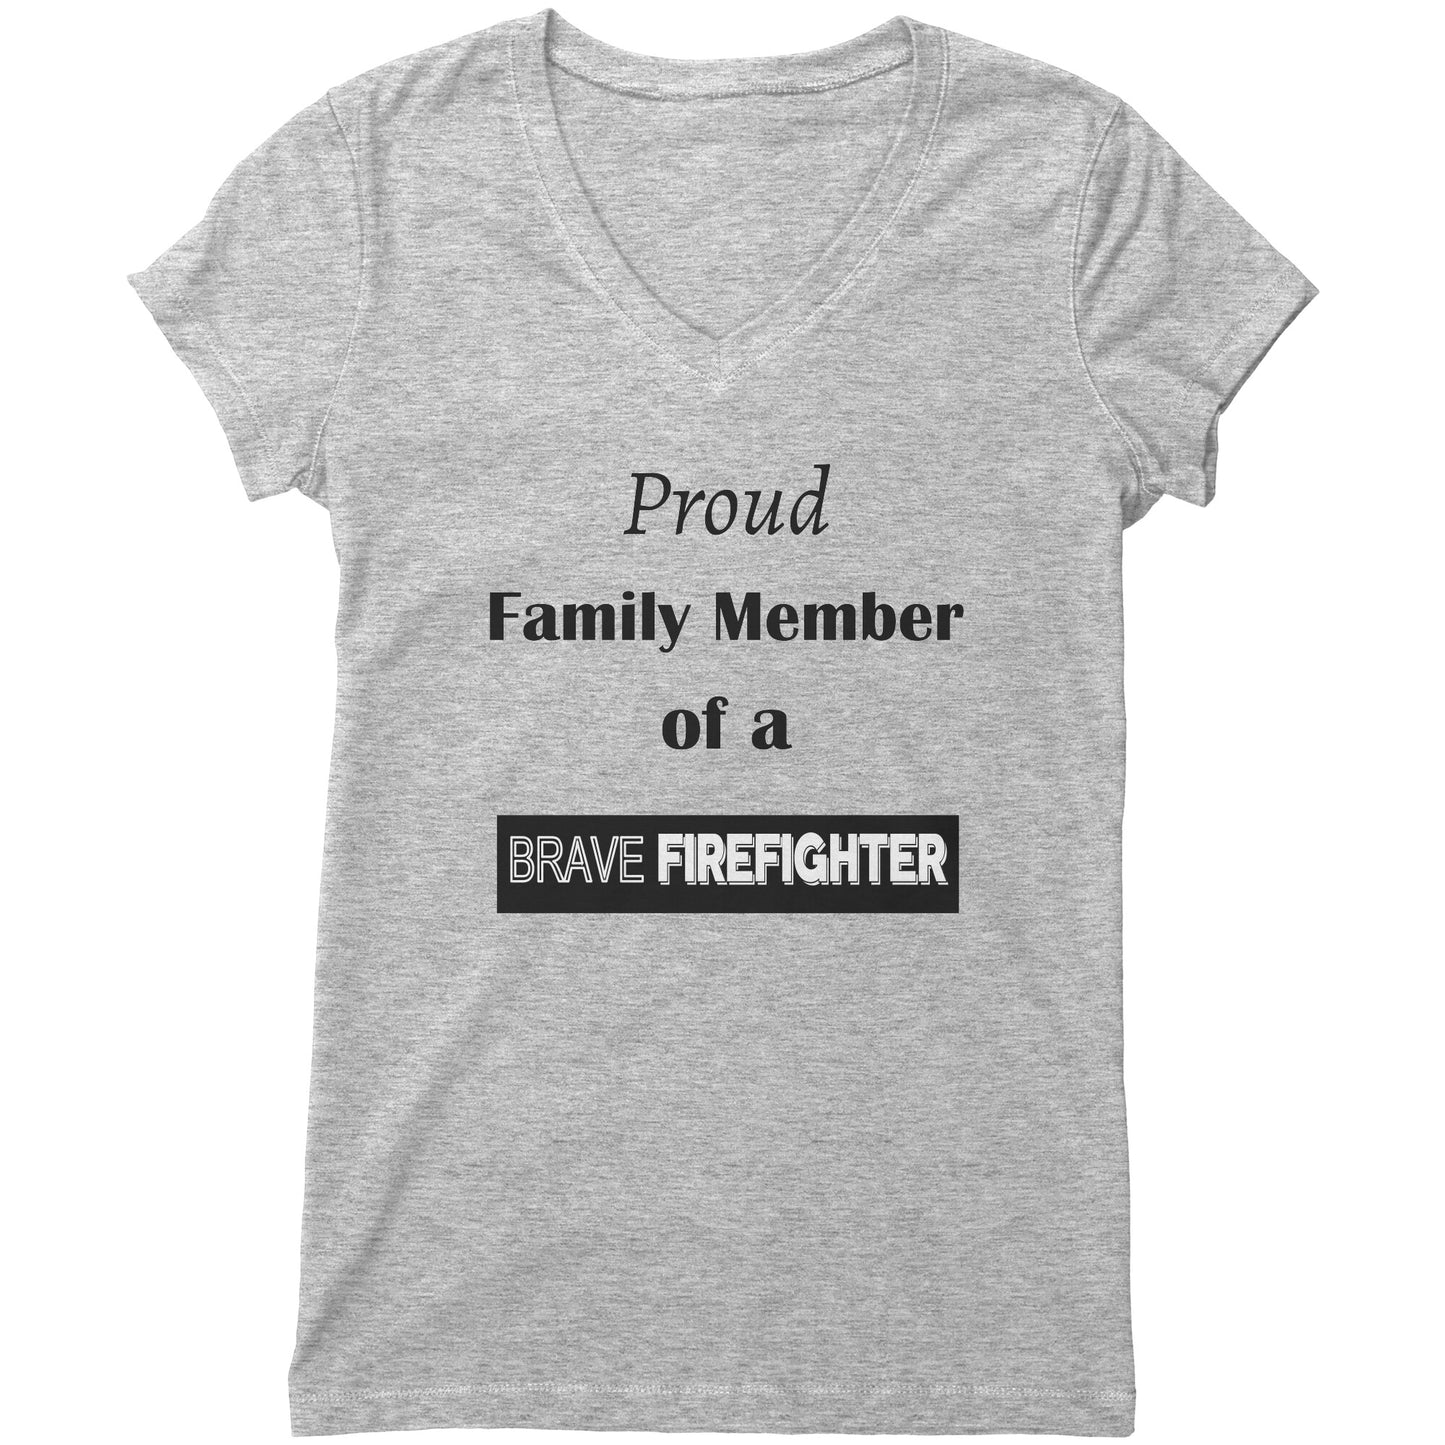 Proud Family Member of a Brave Firefighter Lettering Womens Shirt - Signs and Seasons Gifts